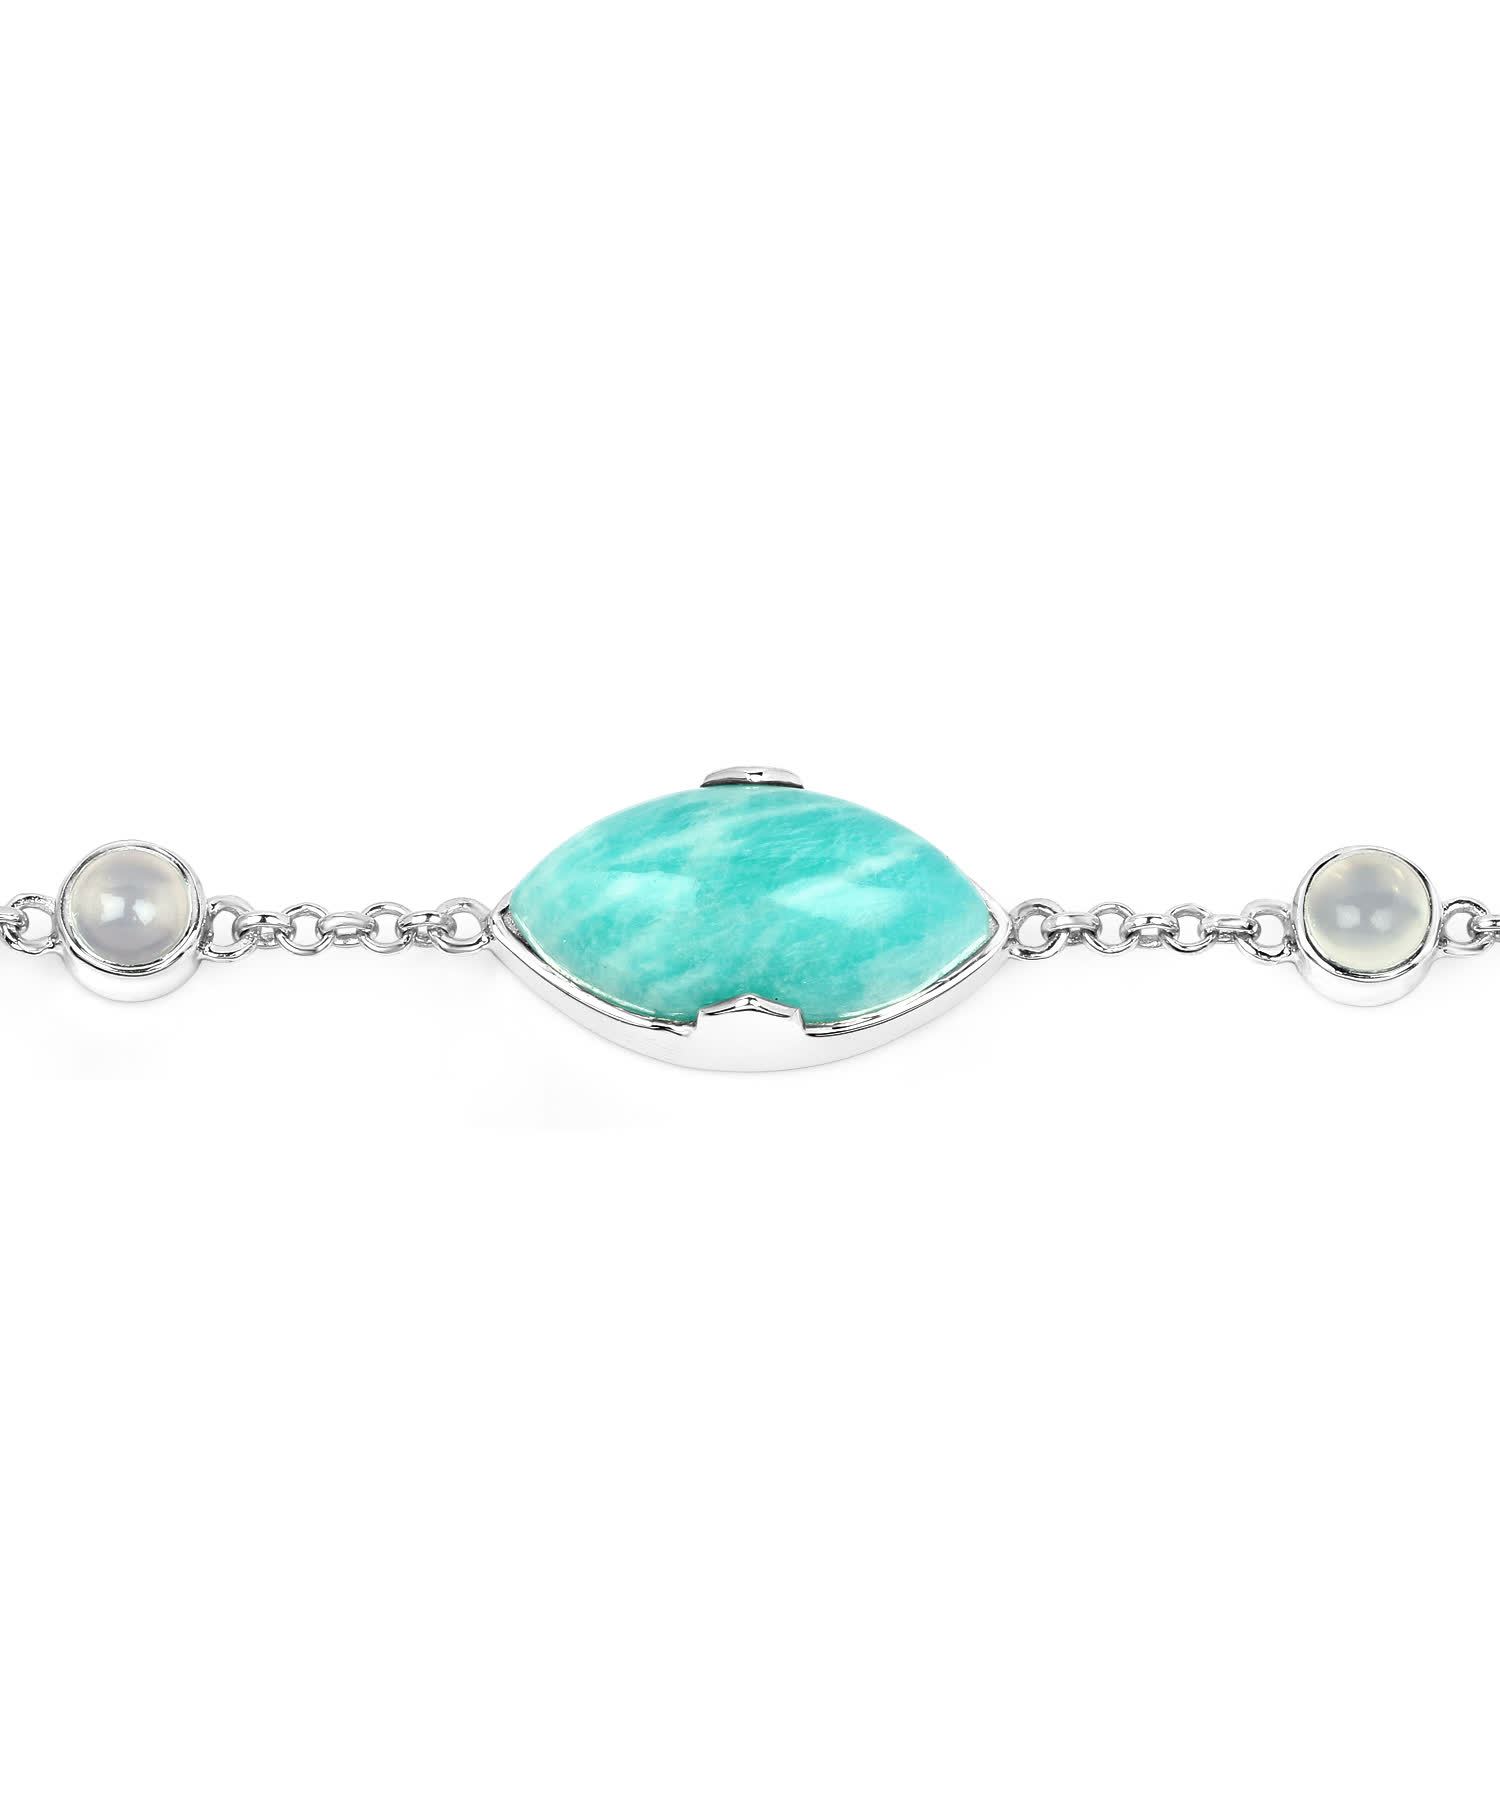 29.70ctw Natural Amazonite and Agate Rhodium Plated 925 Sterling Silver Link Bracelet View 3